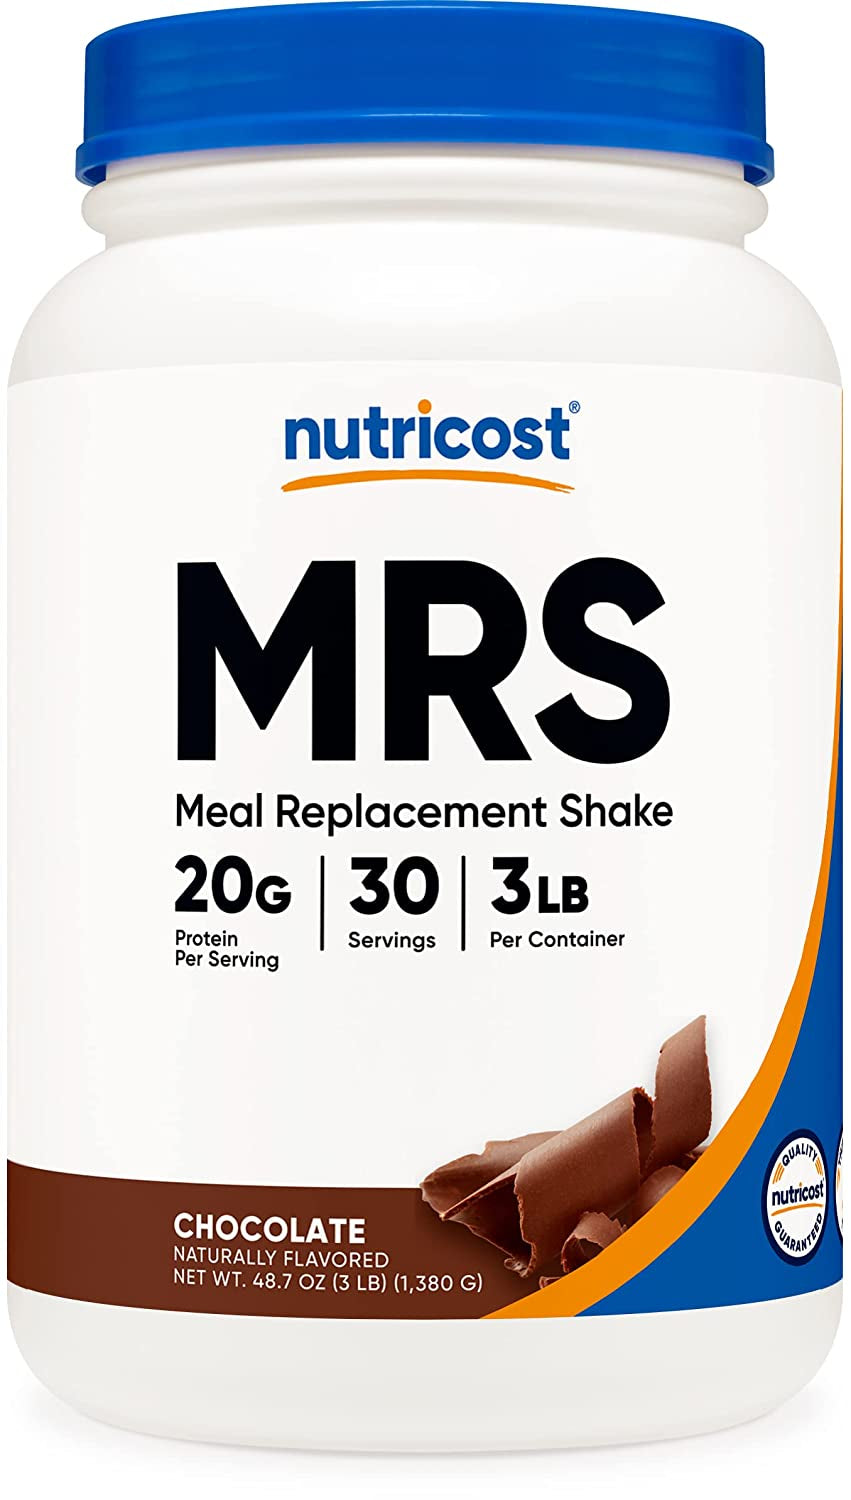 Nutricost Meal Replacement Shake Powder (Chocolate), 30 Servings - Protein, Non-Gmo, Gluten Free